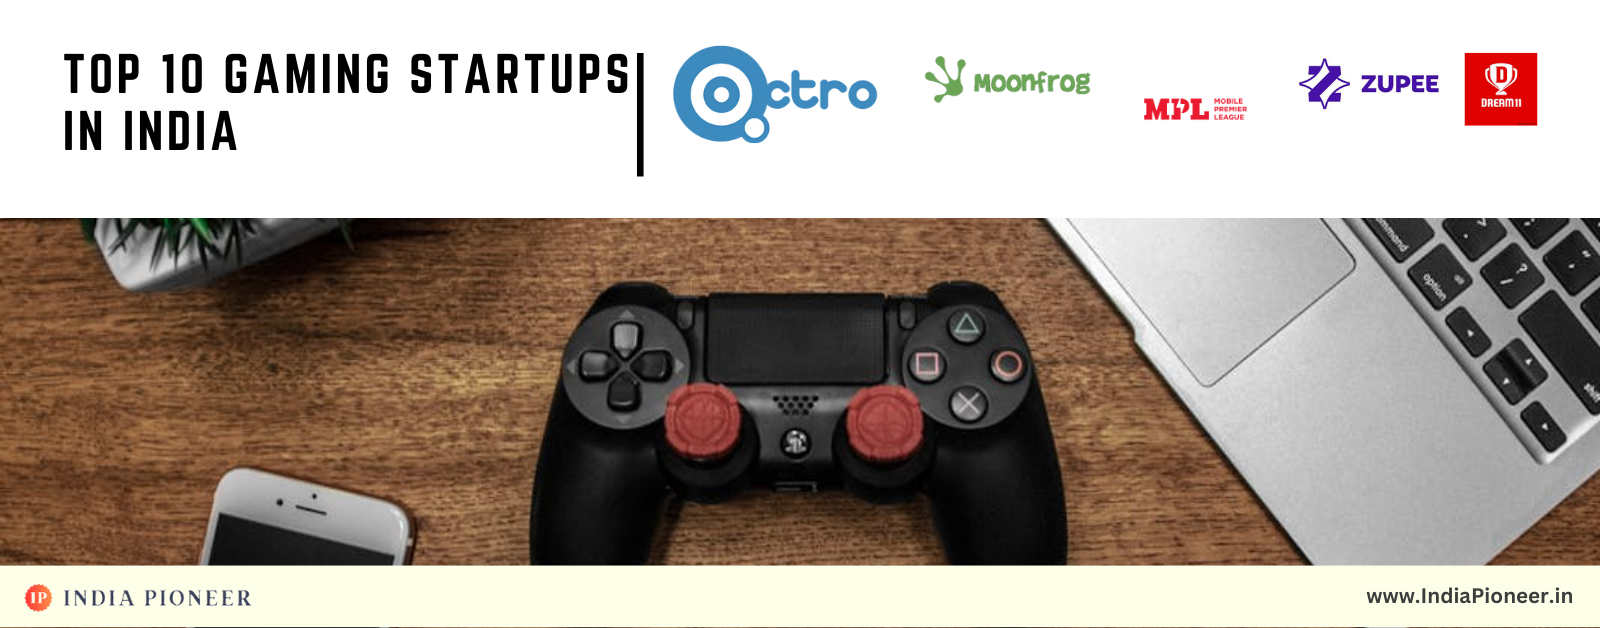 Top 10 Gaming Startups in India